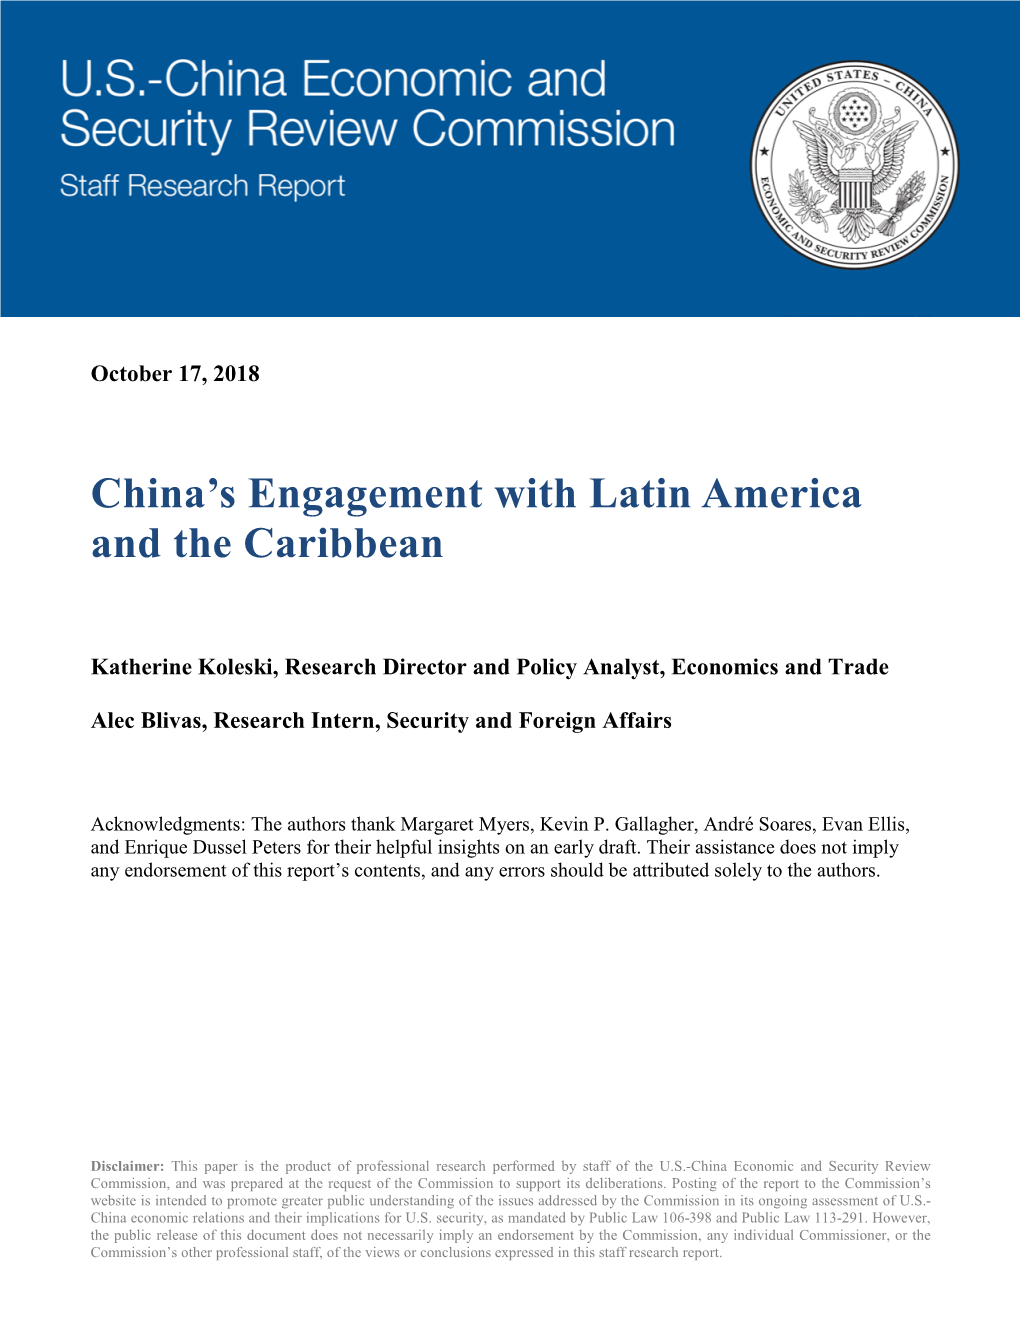 China's Engagement with Latin America and the Caribbean